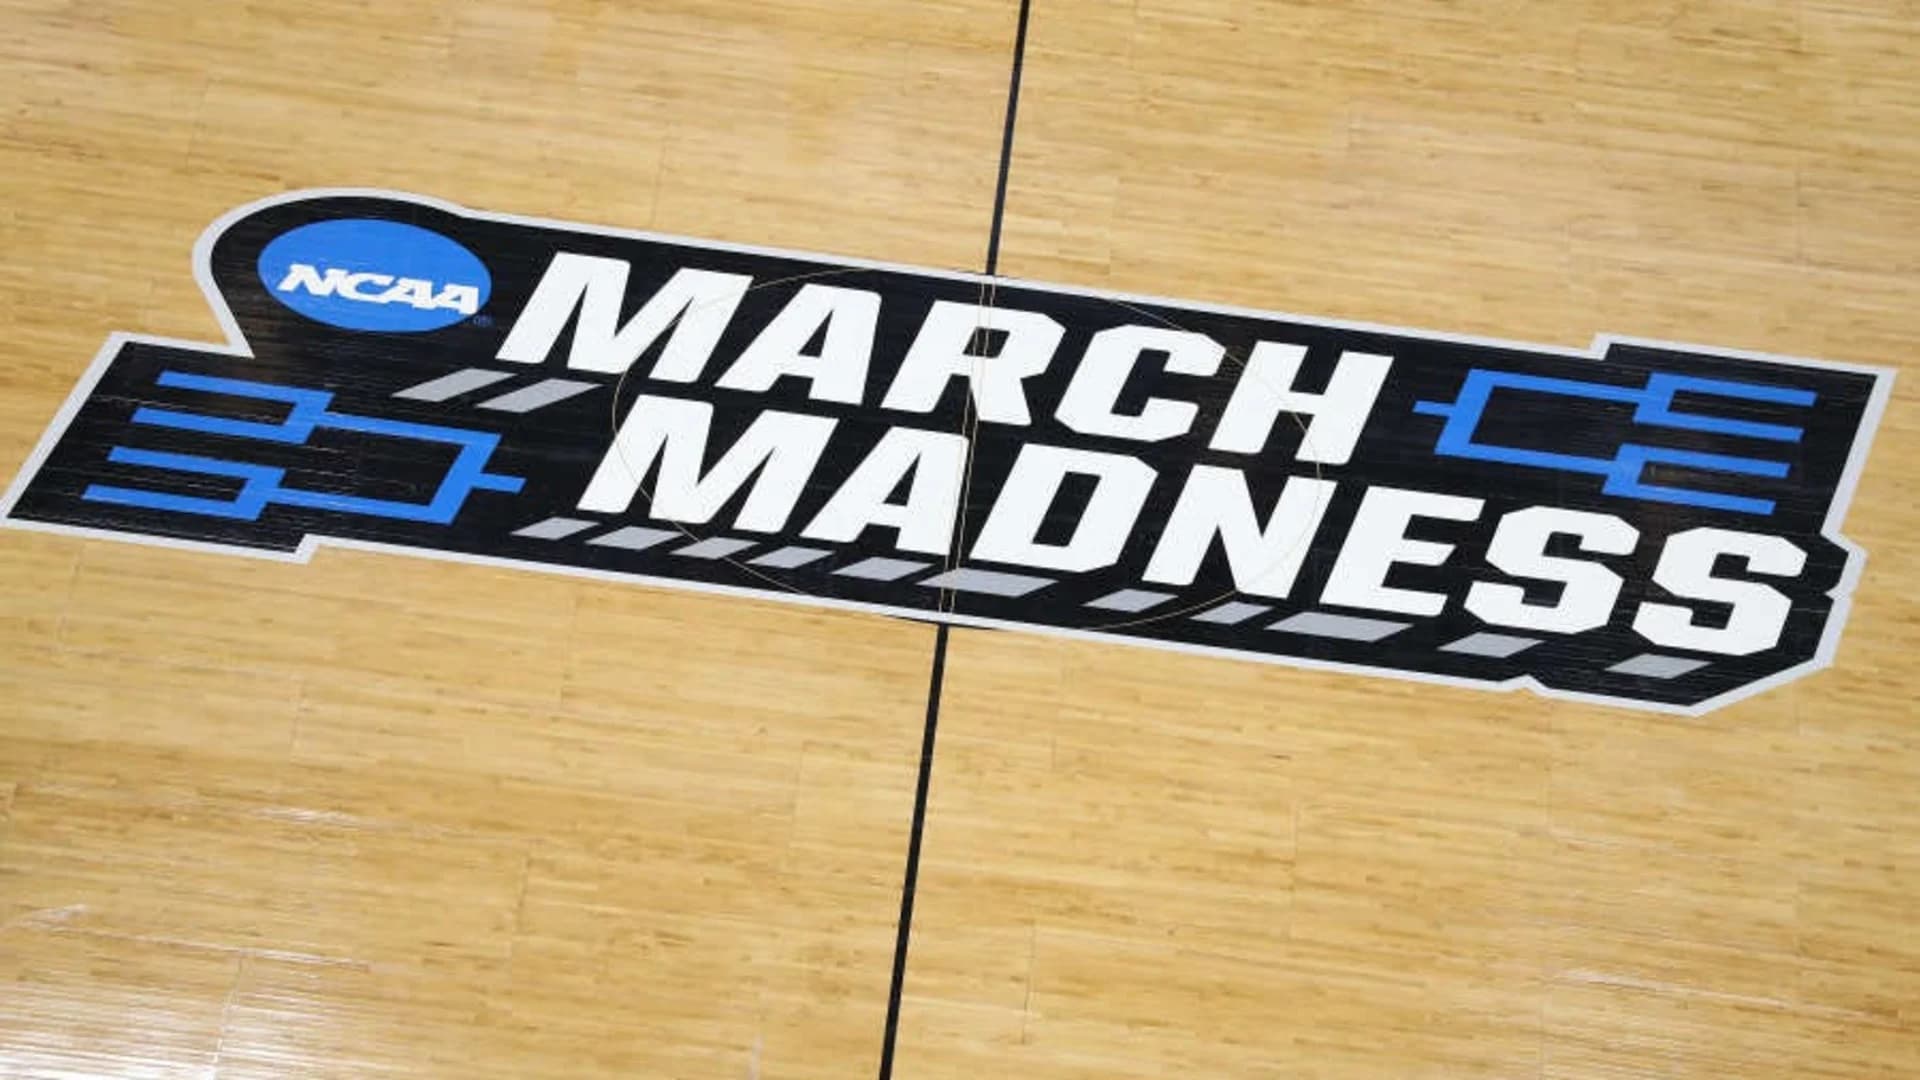 NCAA: Ohio man owns world's only perfect March Madness bracket